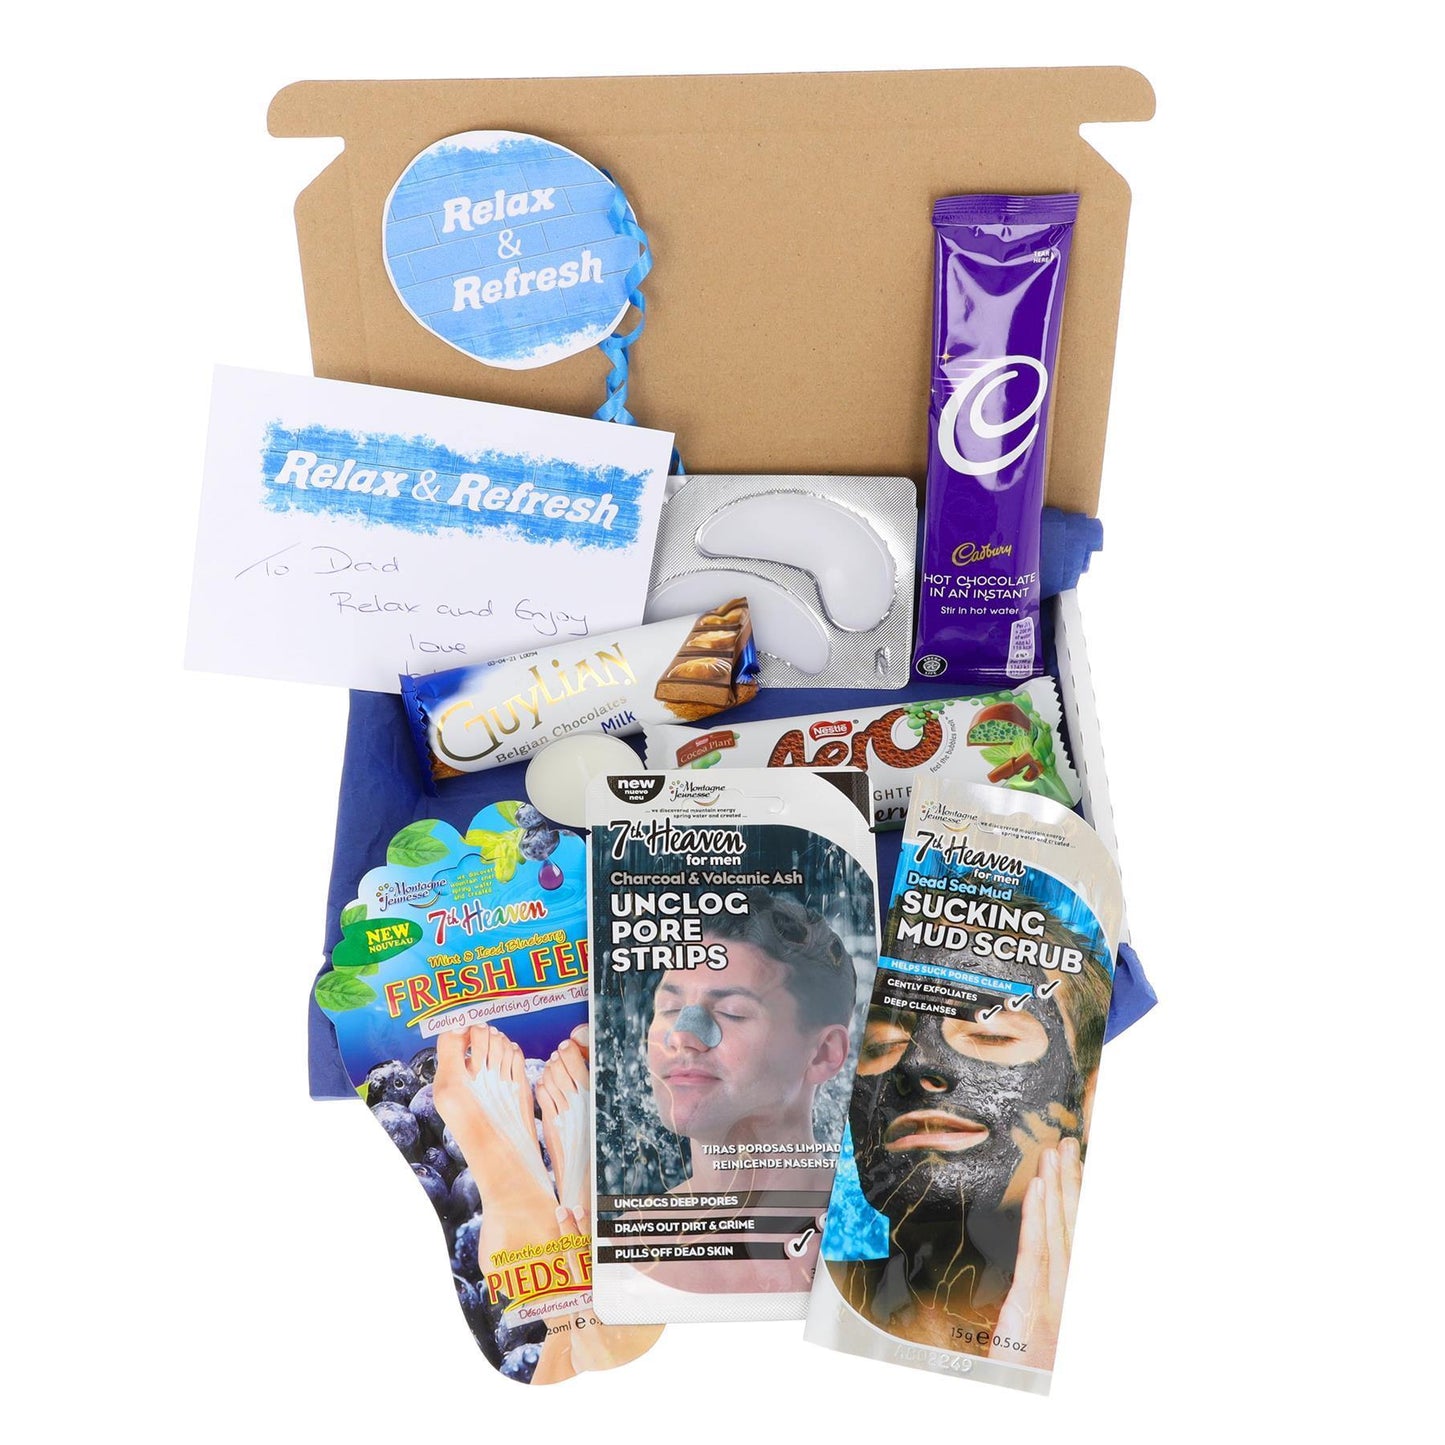 Pamper Treat & Sweet Box for Men Letterbox Gift  - Always Looking Good - Hot Chocolate  